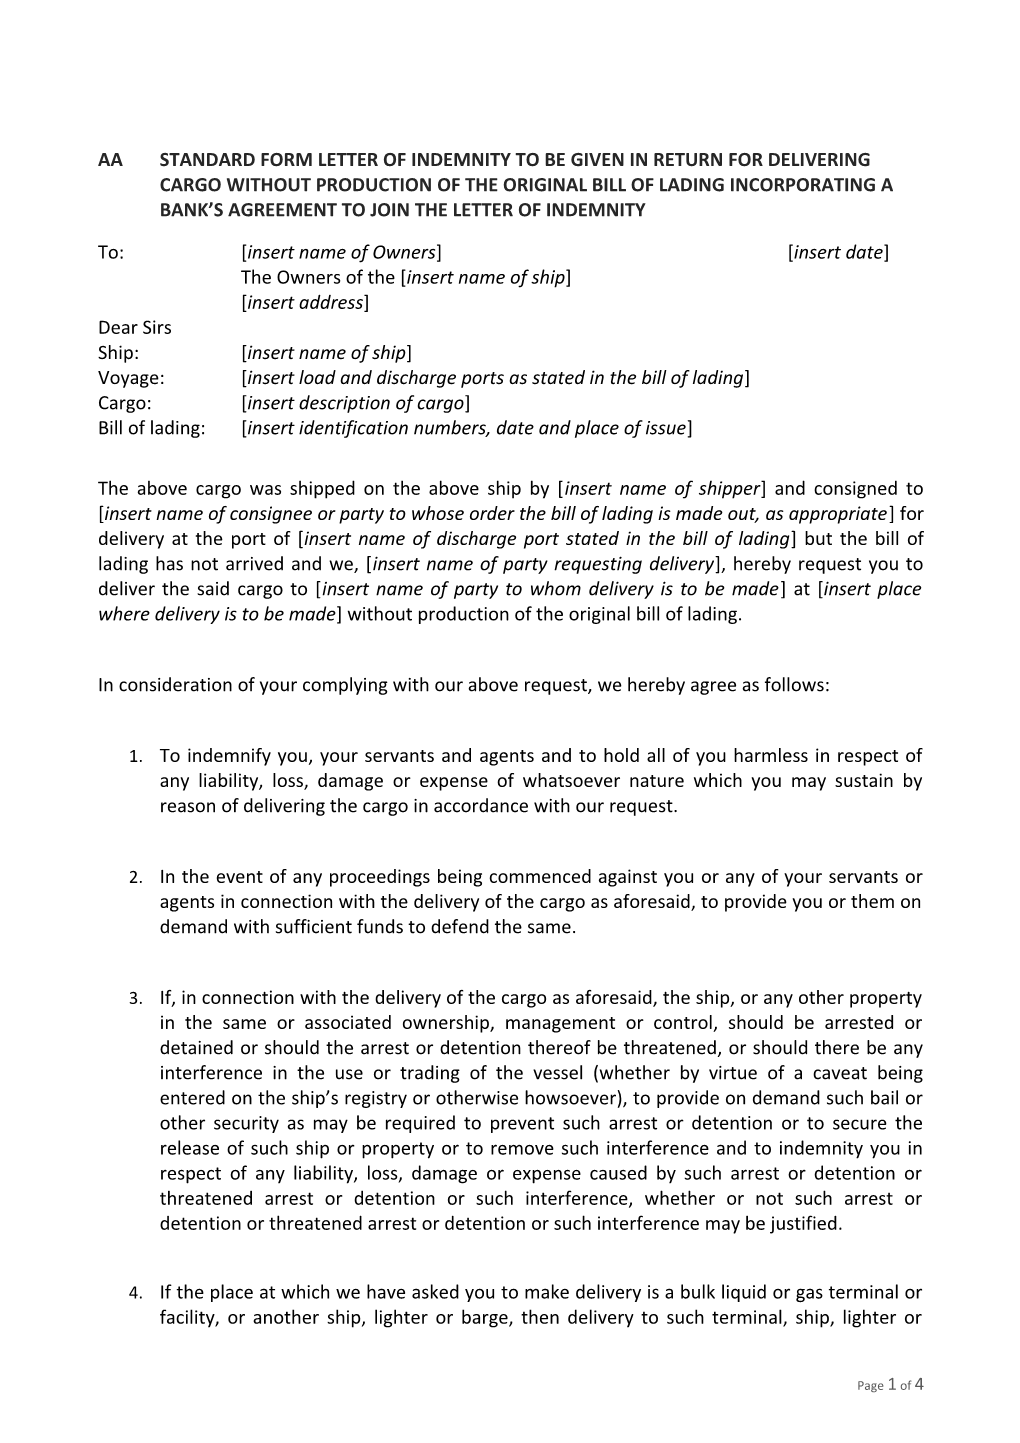 Aastandard Form Letter of Indemnity to Be Given in Return for Delivering Cargo Without